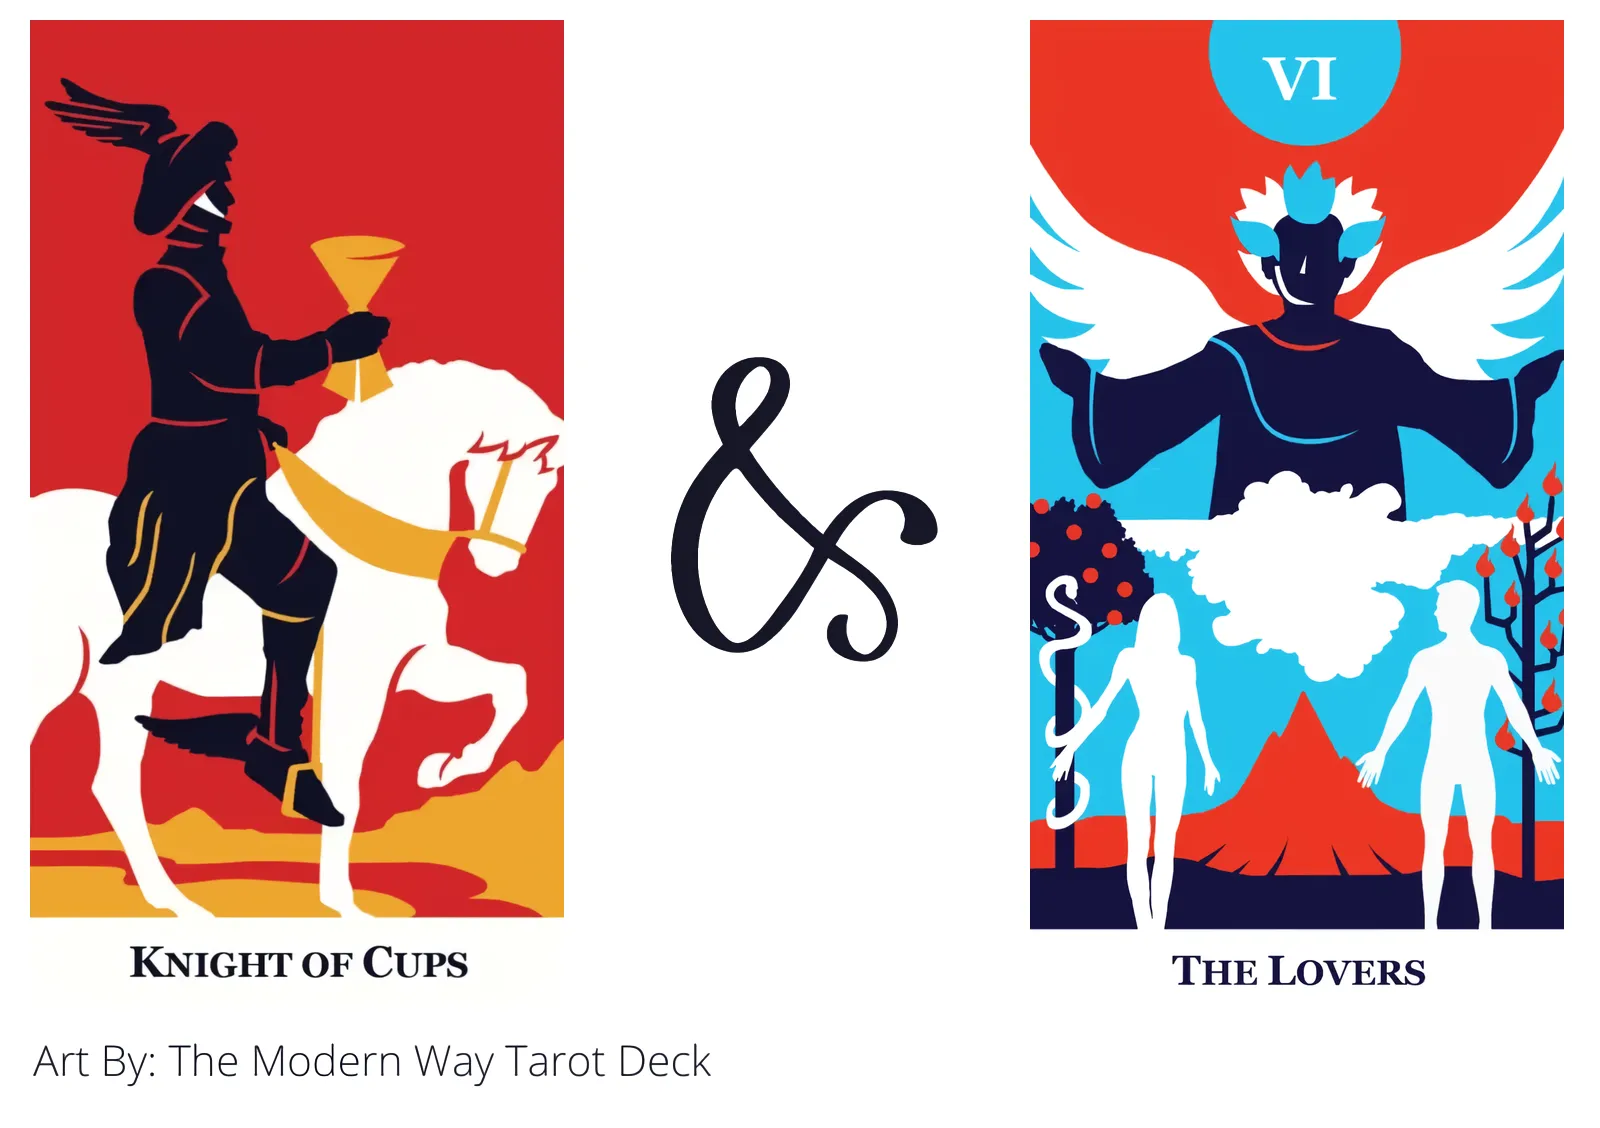 knight of cups and the lovers tarot cards together